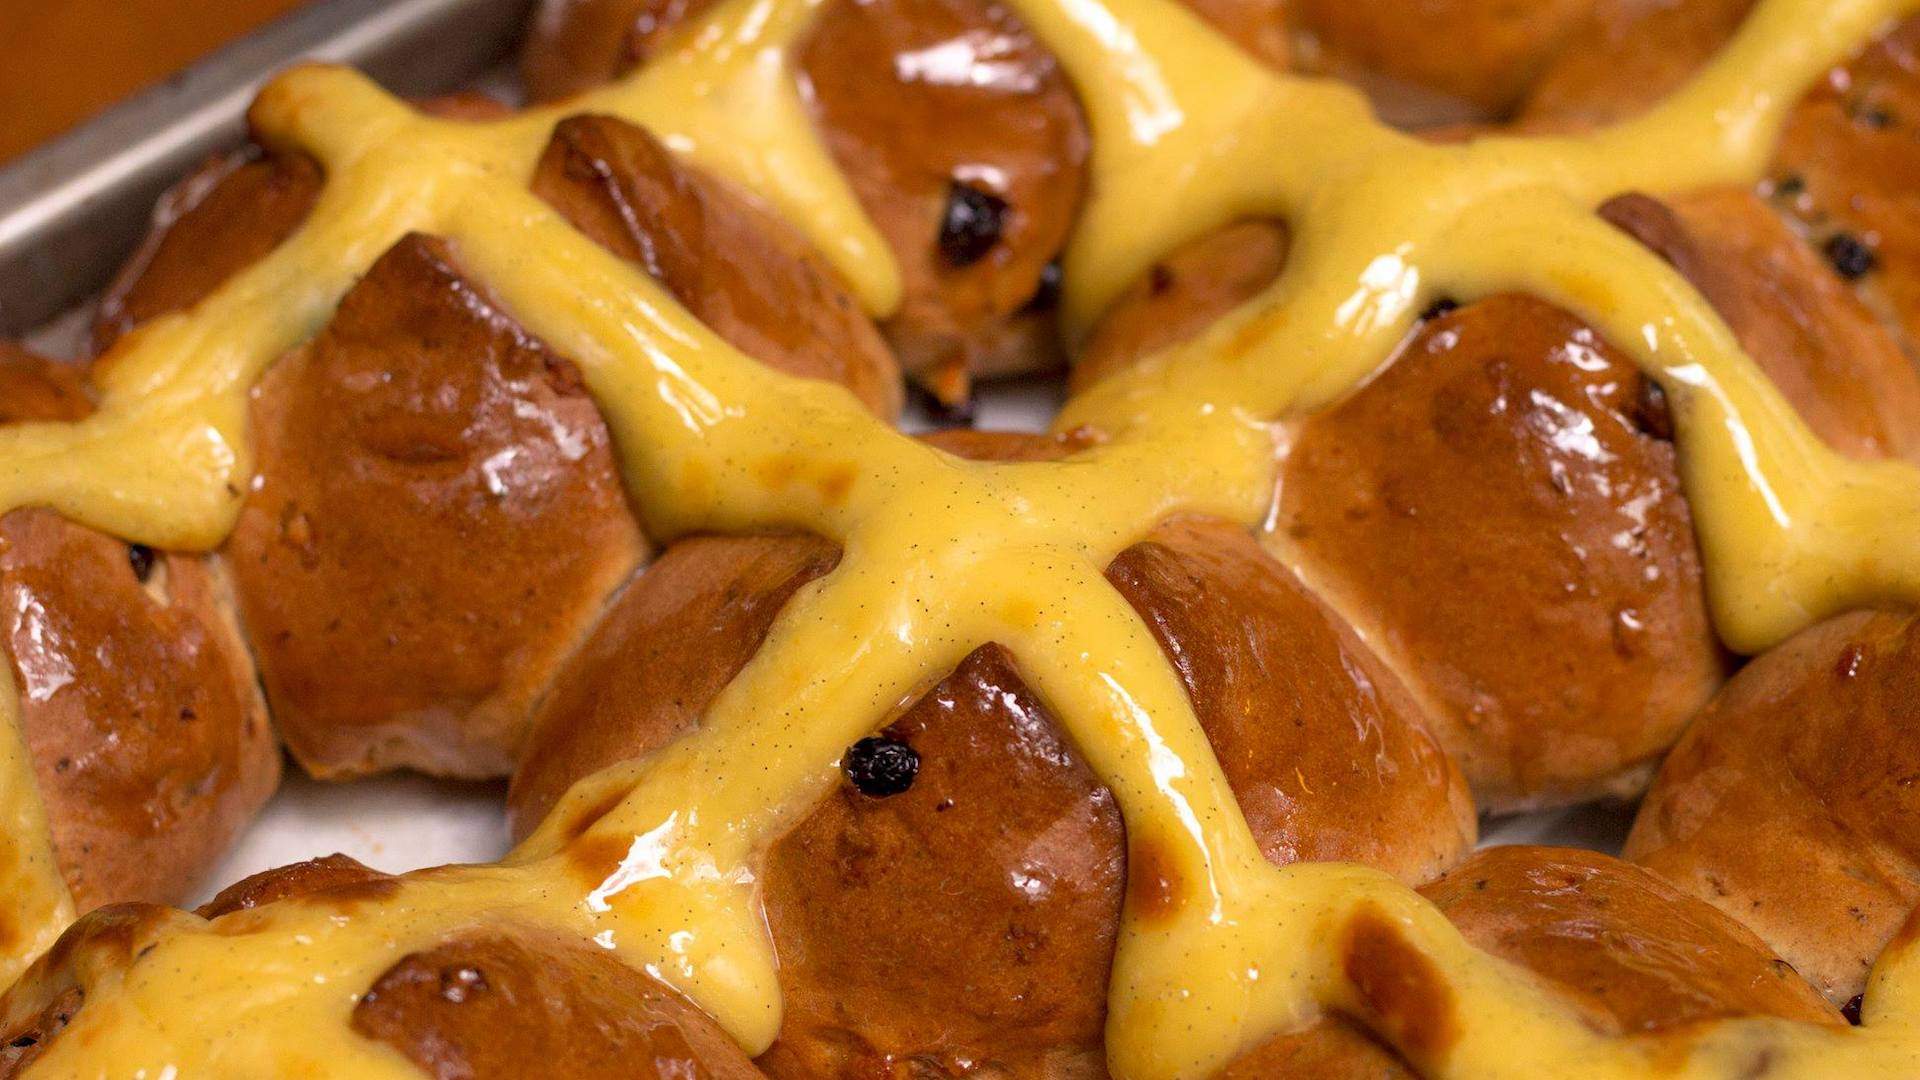 Ima Cuisine Is Selling Hot Cross Bun Kits So You Can Make Its Famous Easter Treats at Home